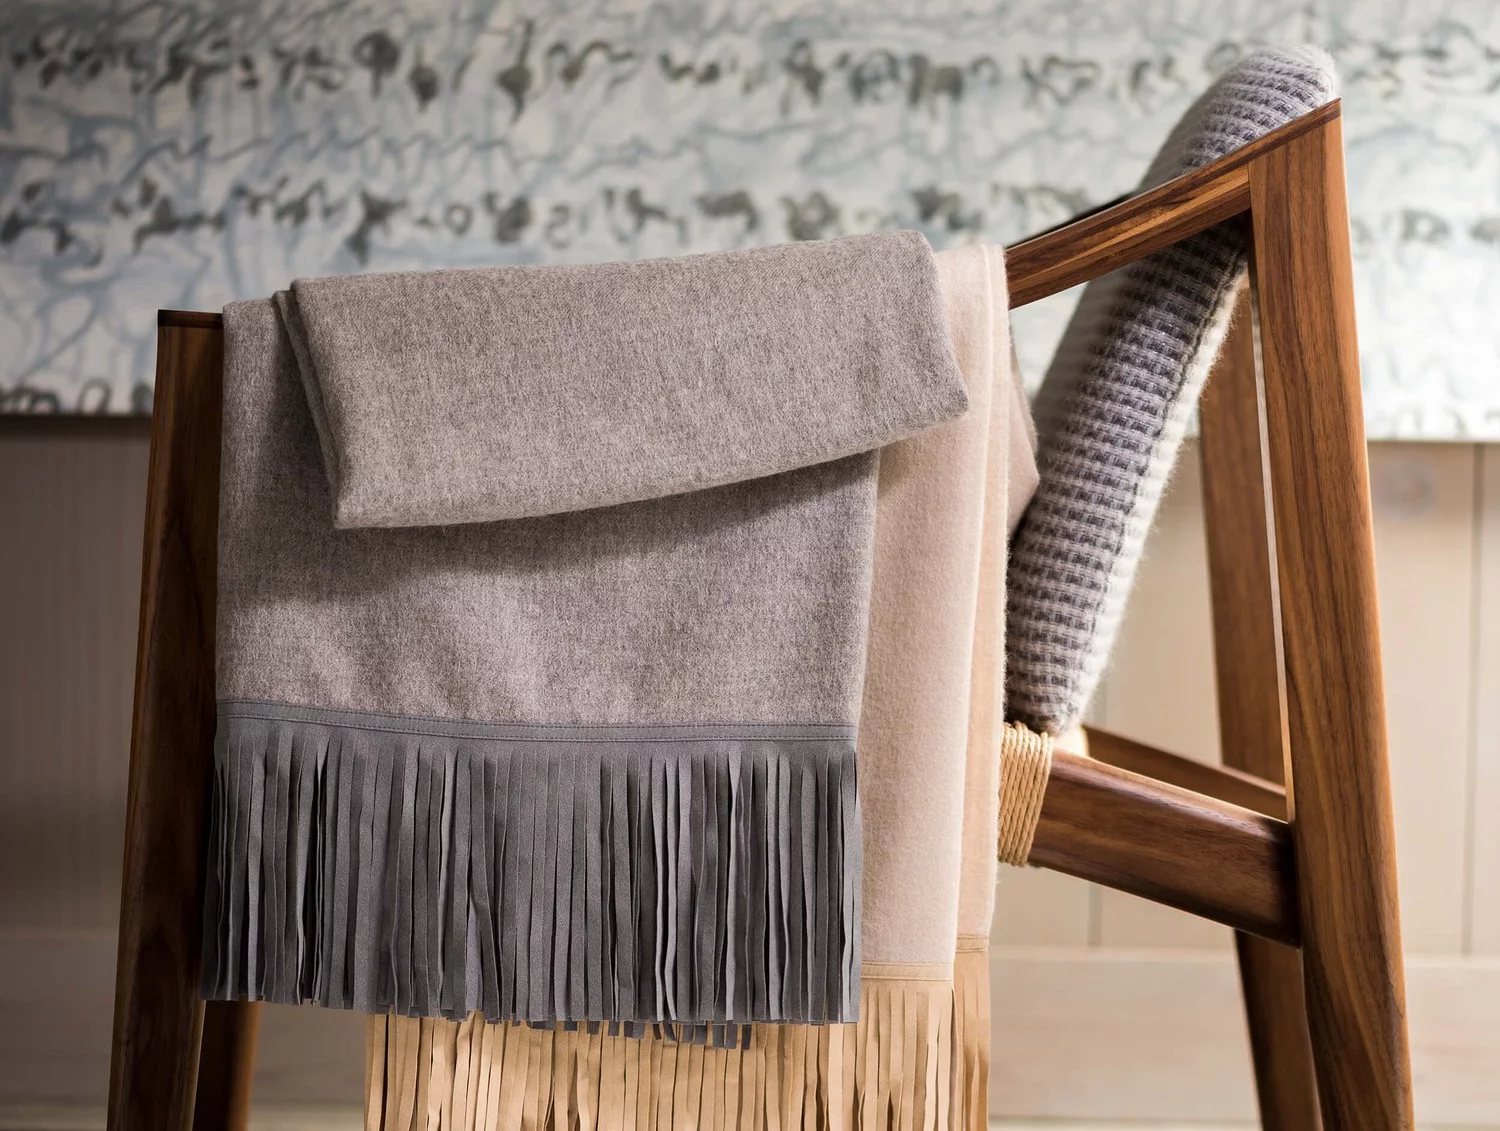 Woven blankets draped over the arm of a chair.